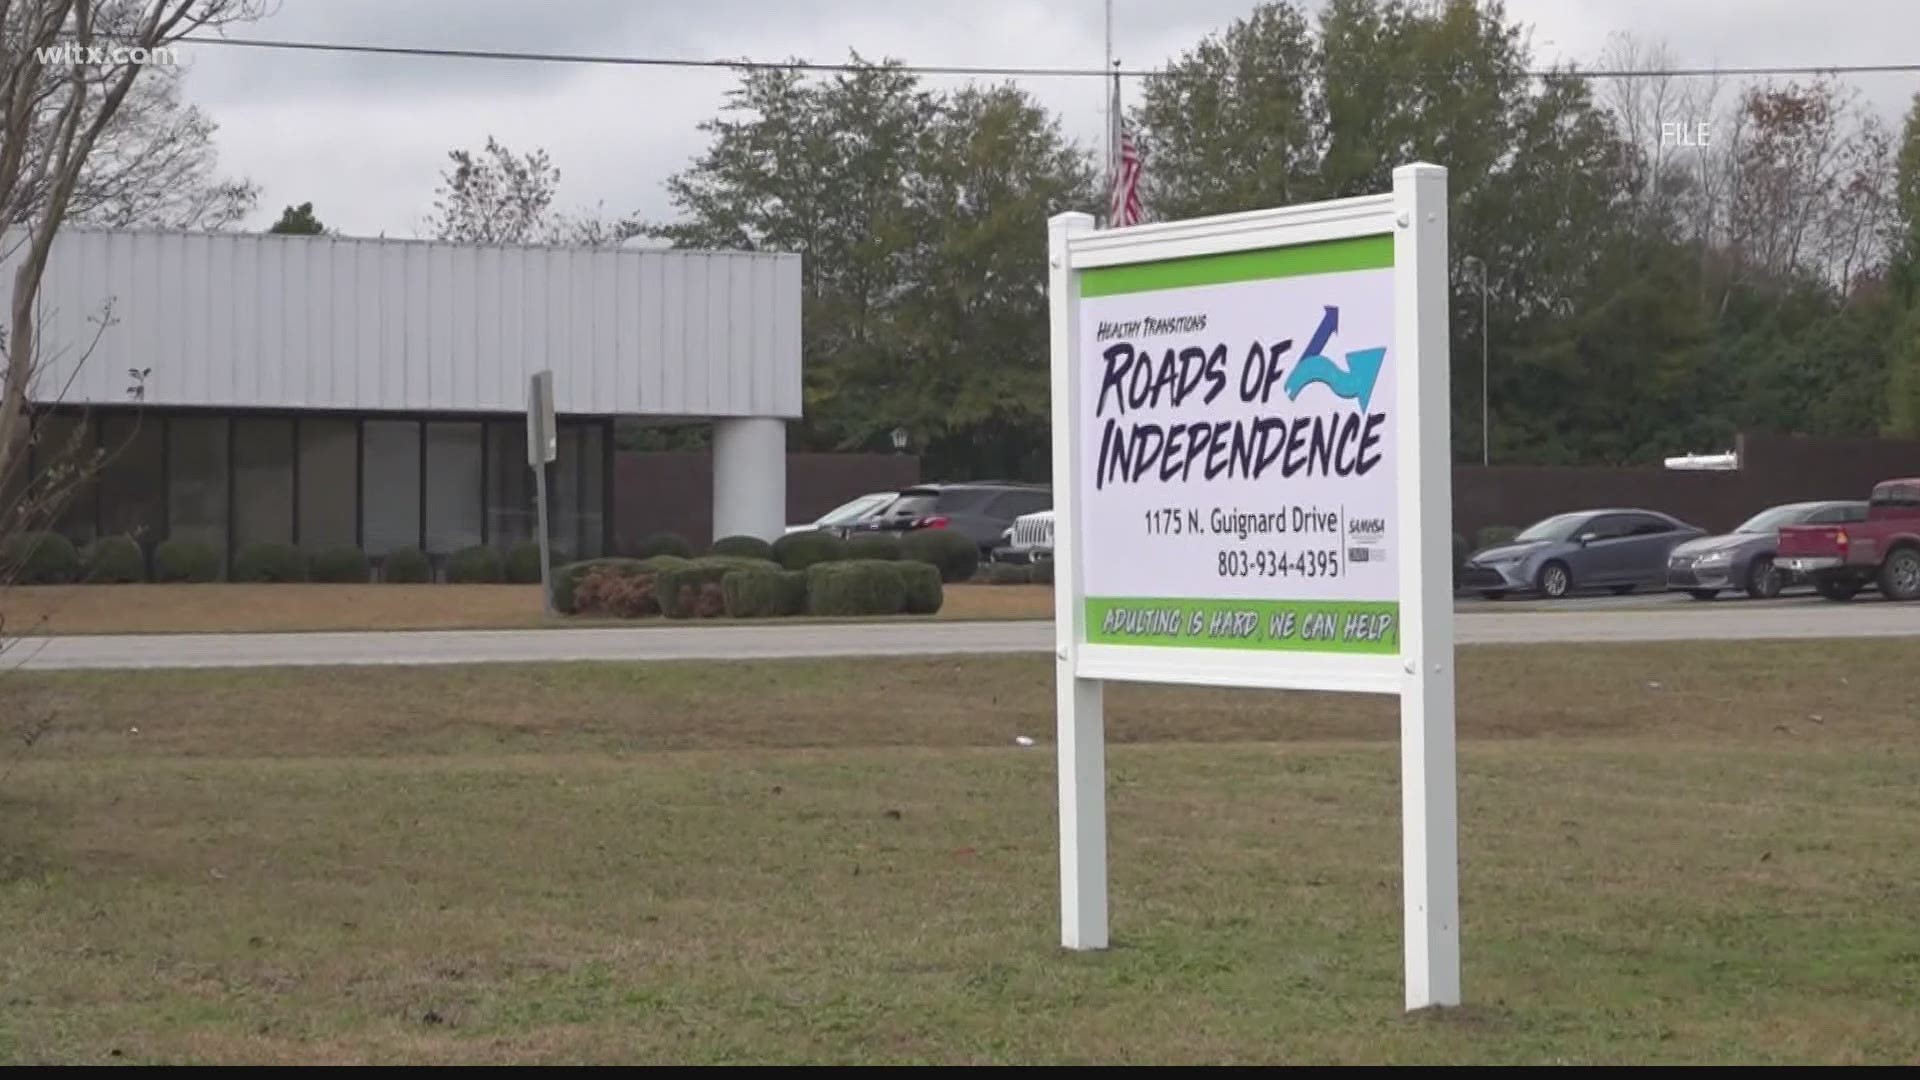 Sumter’s Healthy Transitions: Roads of Independence Center is hosting a community fun fair with activities, food, and mental health resources for those in need.